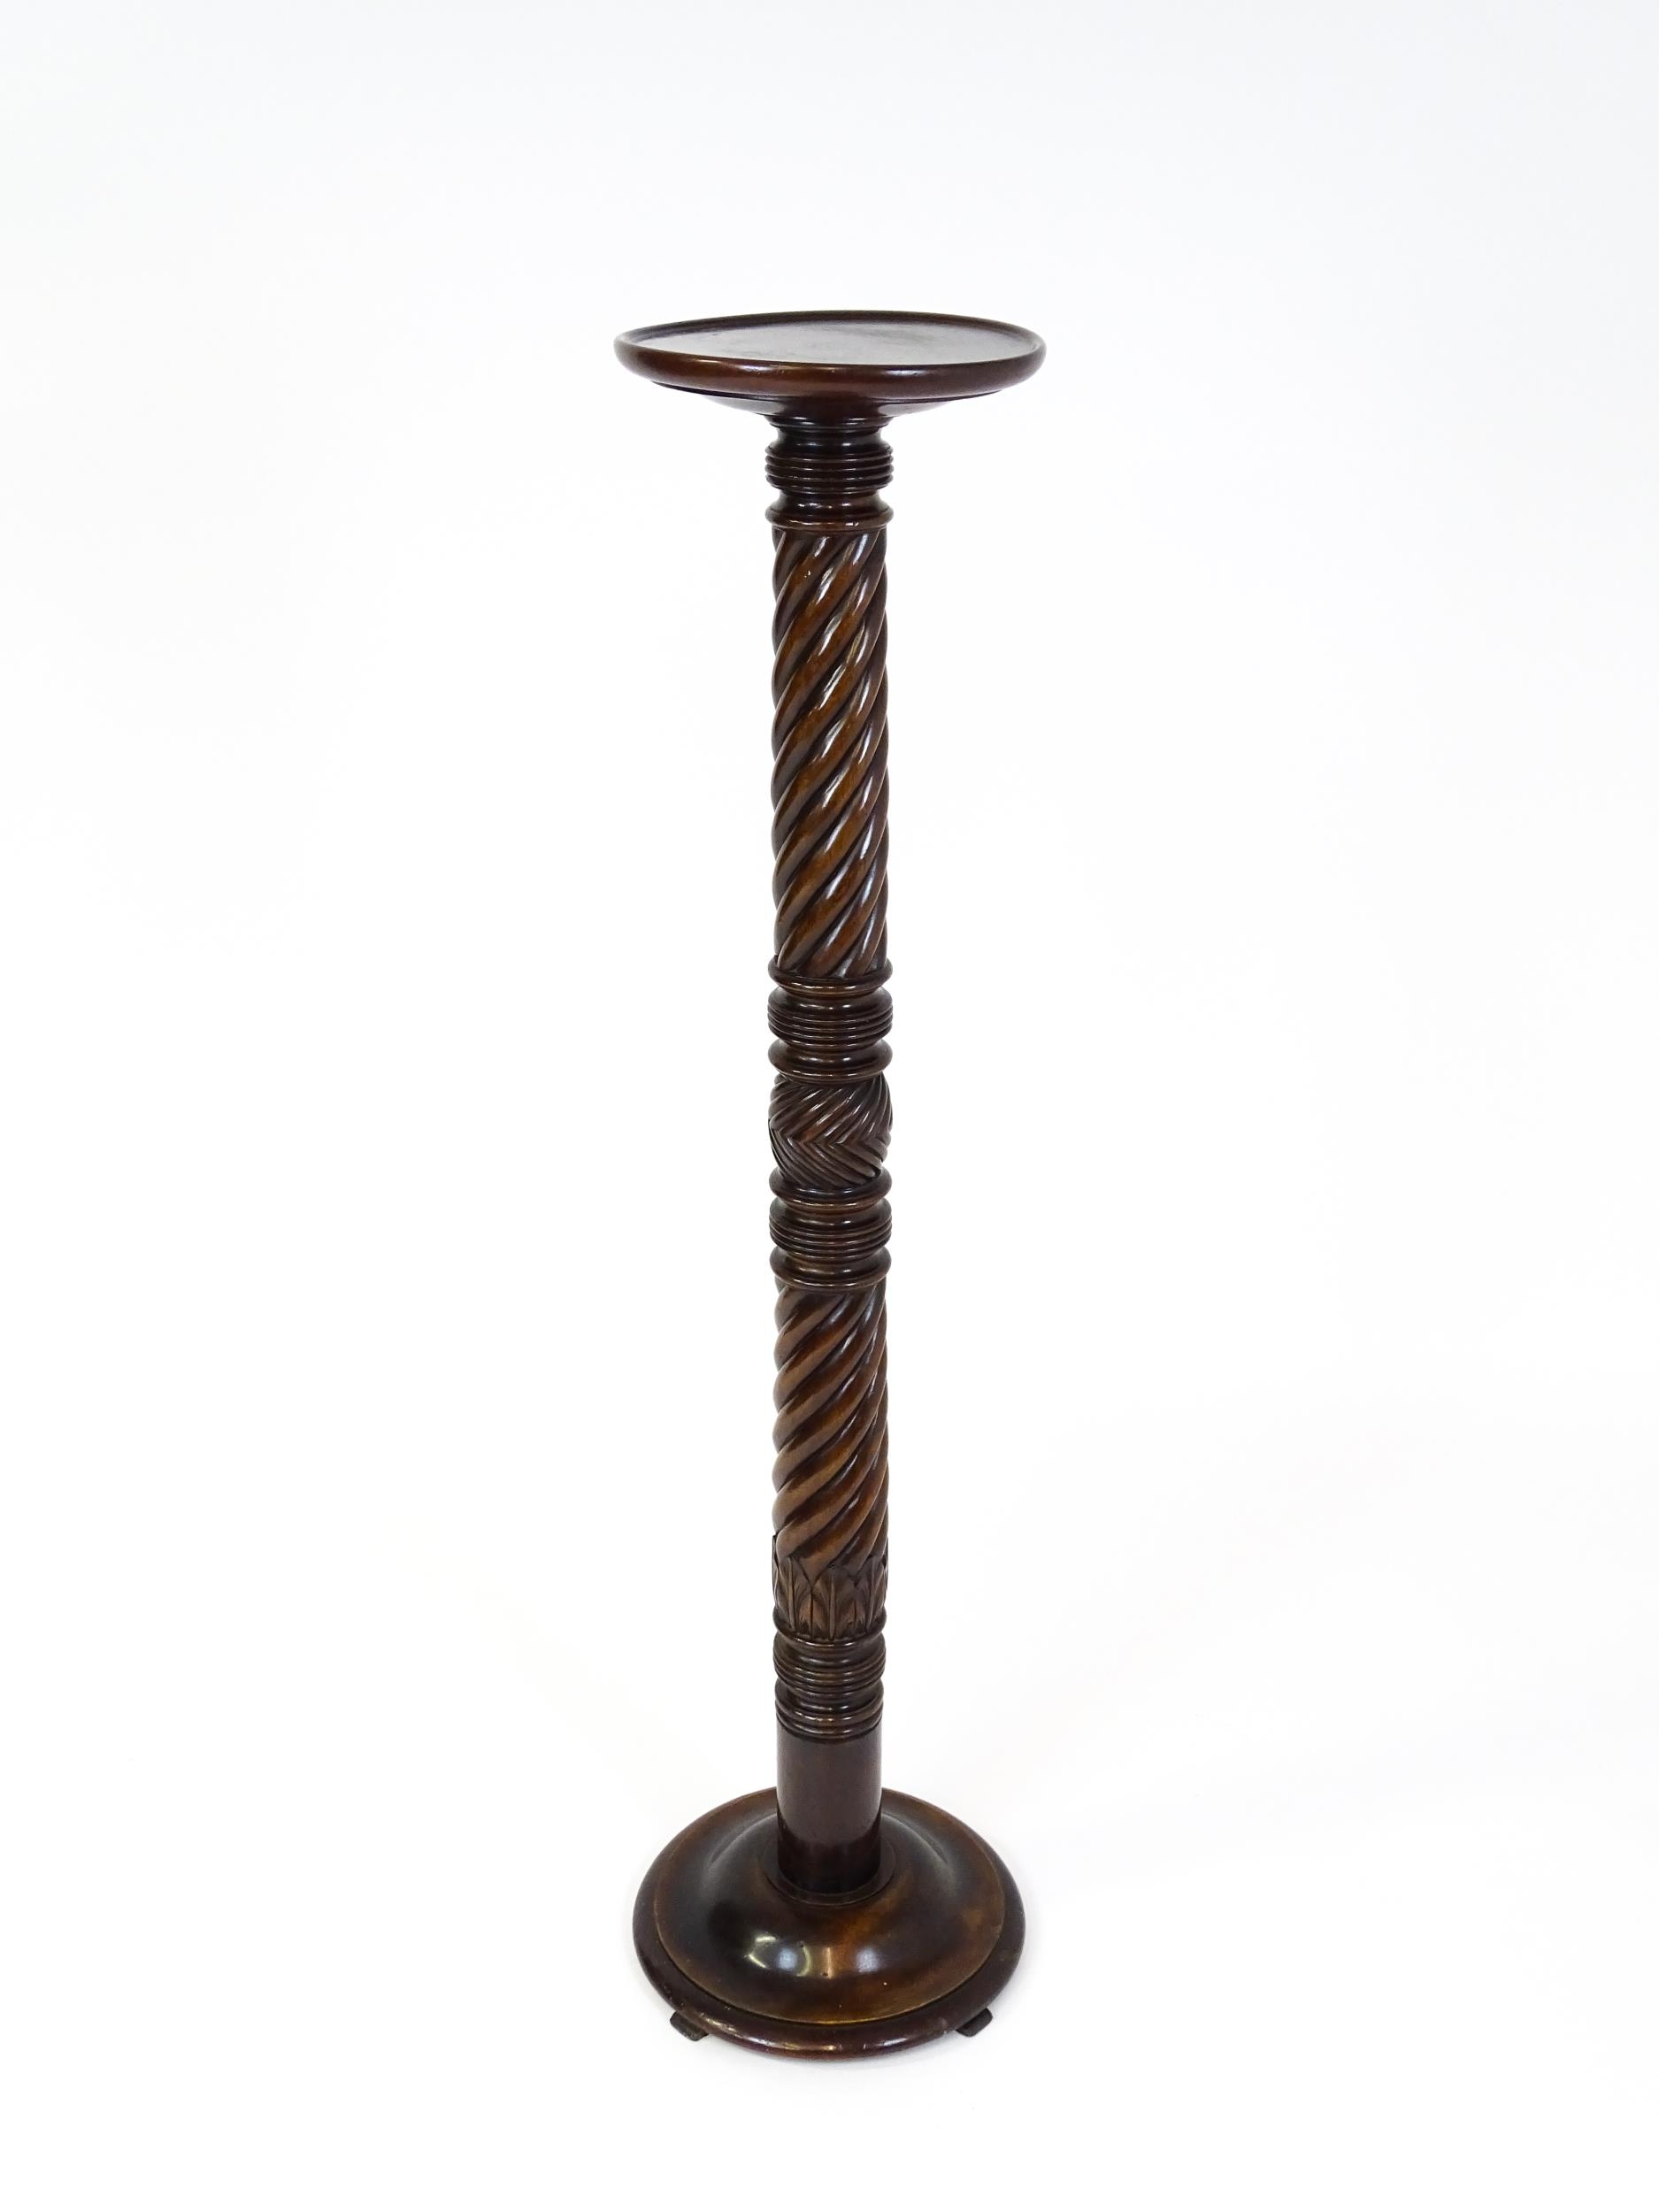 A Victorian mahogany torchiere / jardinière stand with a twist turned pedestal with carved